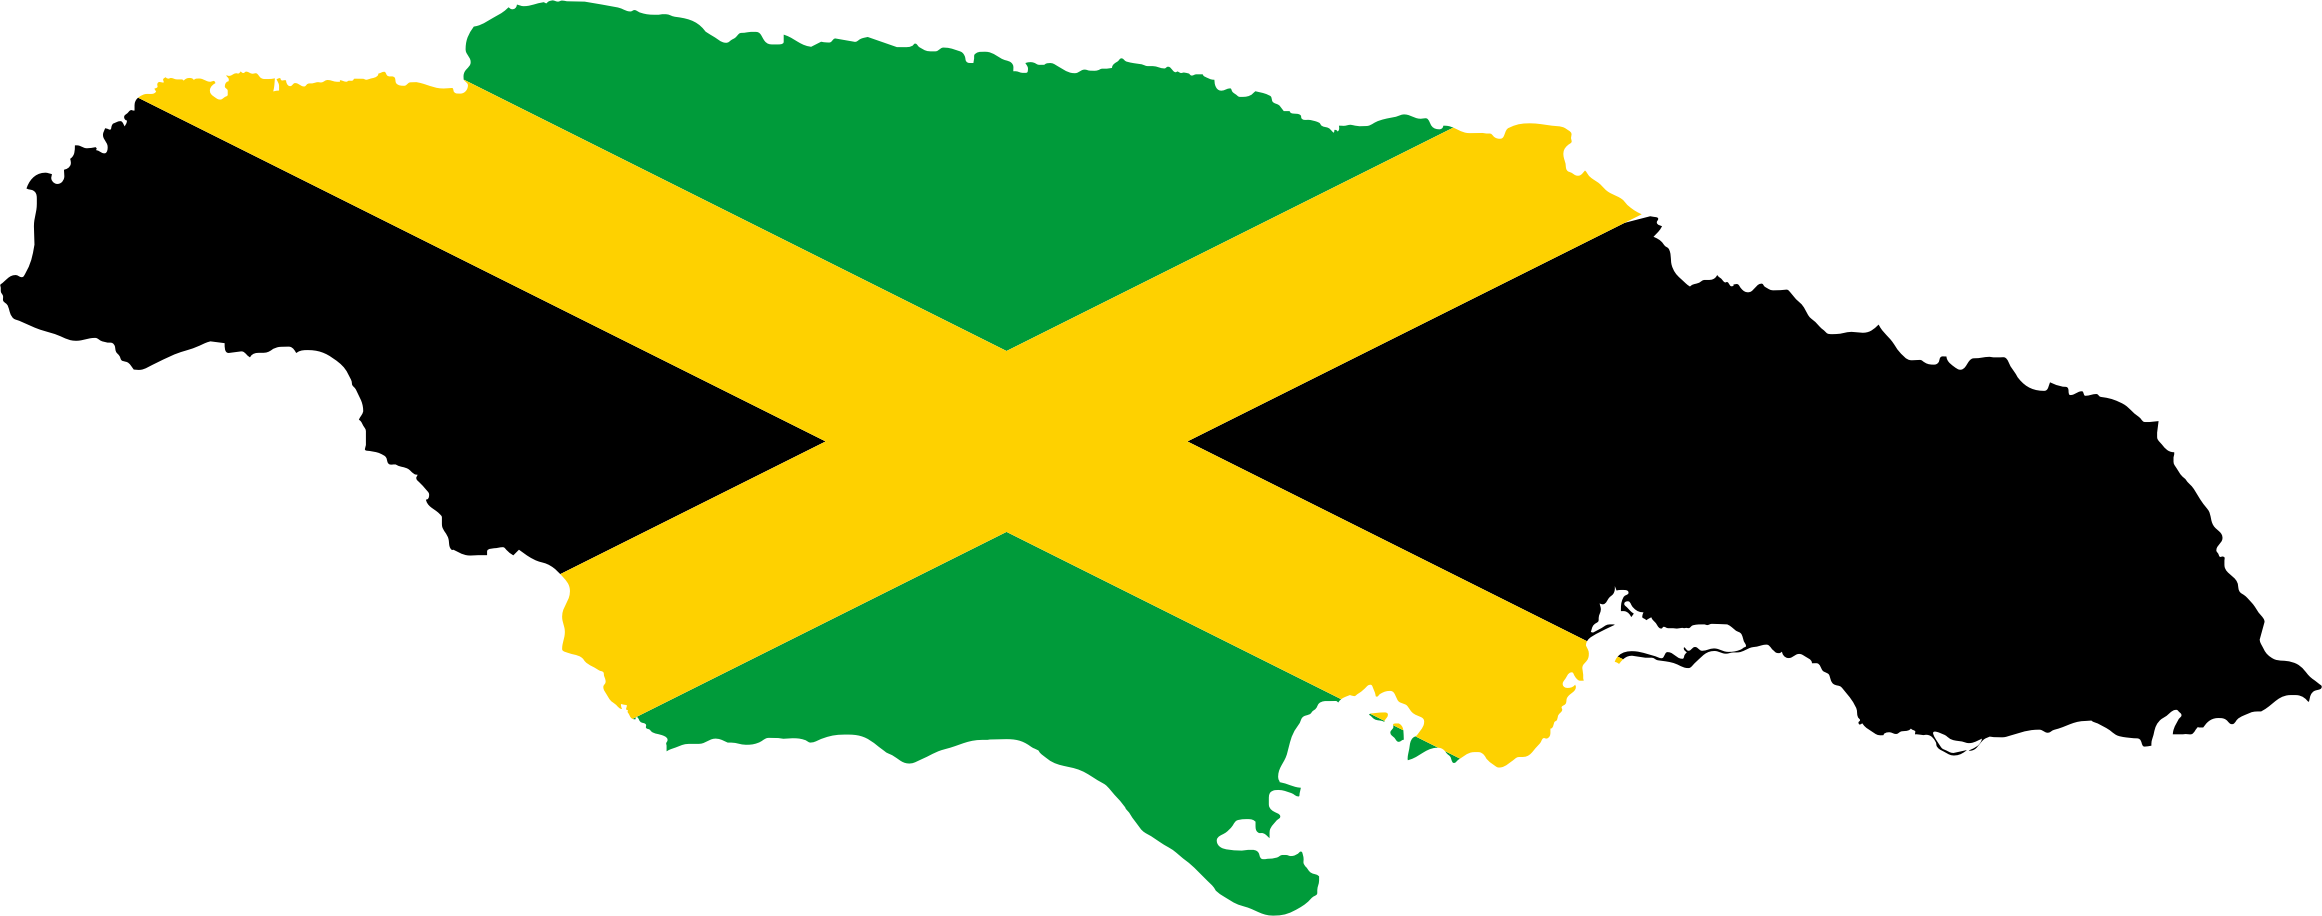 clipart map of jamaica - photo #2